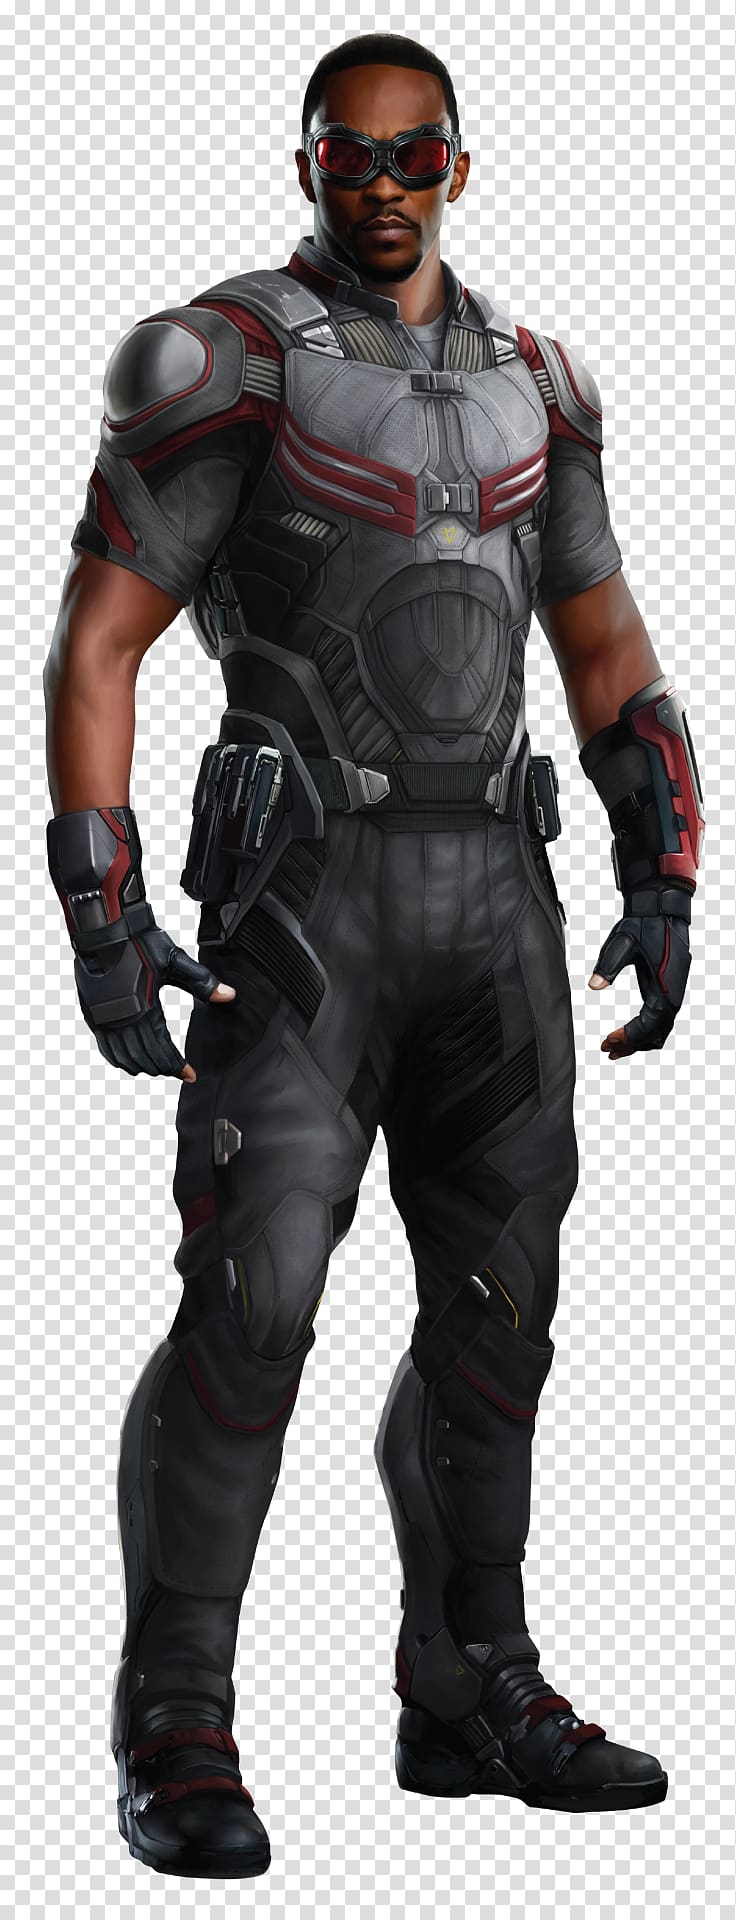 Anthony Mackie Falcon Avengers: Age of Ultron Nick Fury Vision, guardians of the galaxy transparent background PNG clipart